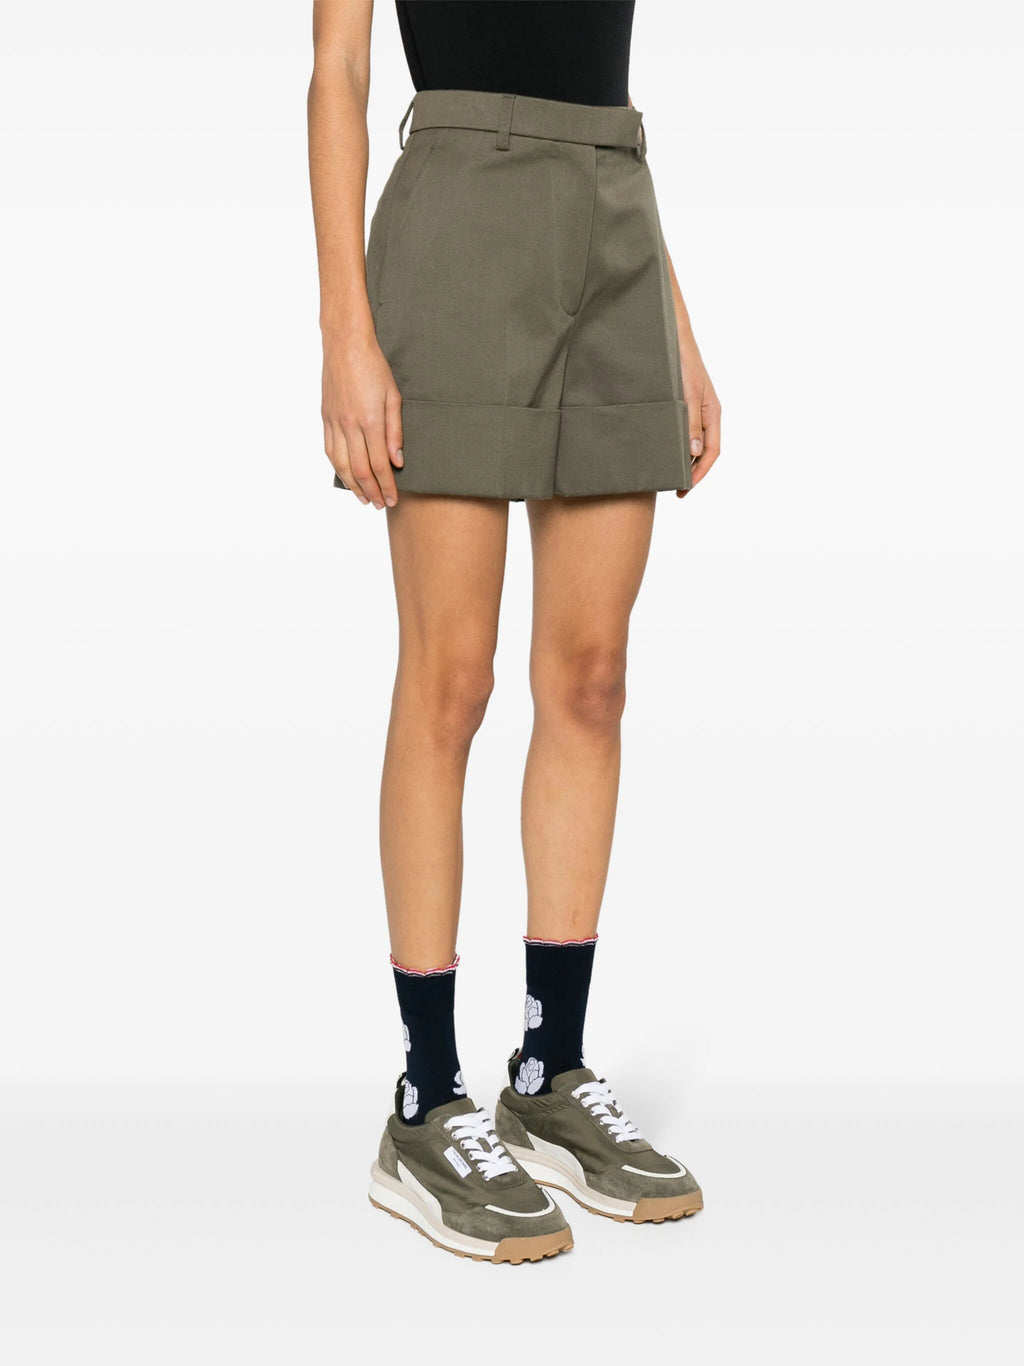 THOM BROWNE Women Fit 2 - Sack Shorts In Cotton Twill